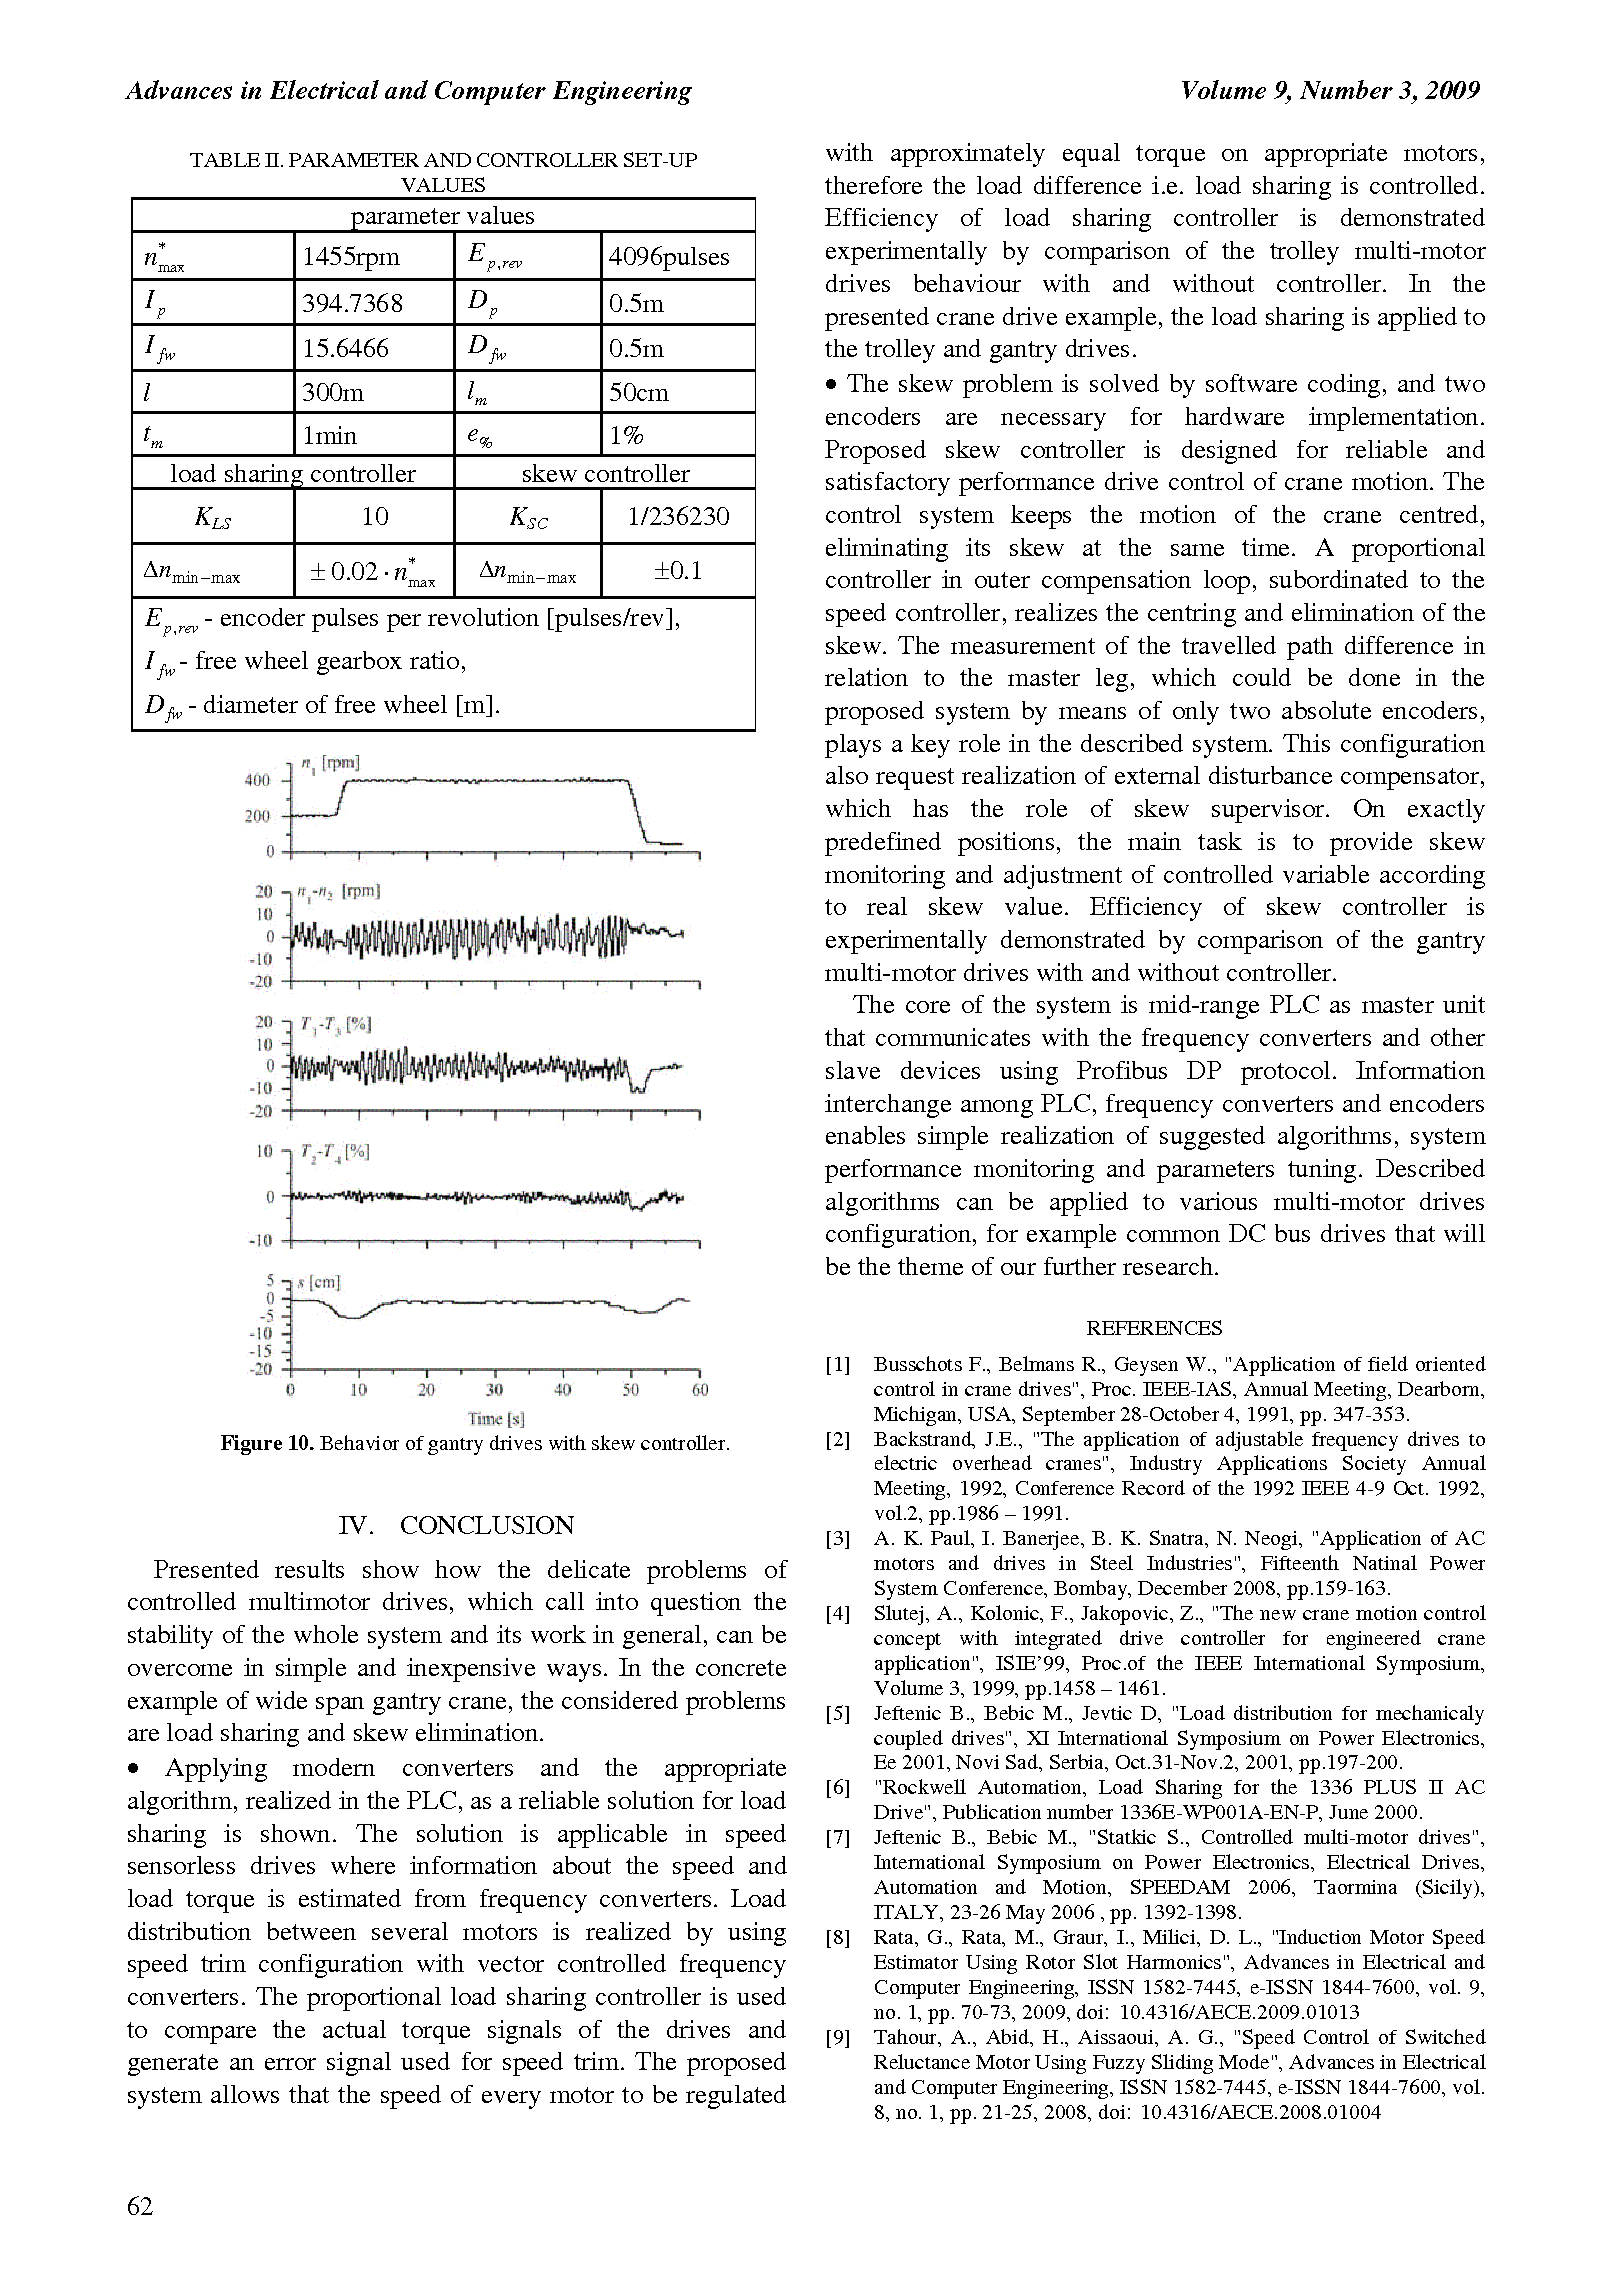 PDF Quickview for paper with DOI:10.4316/AECE.2009.03011